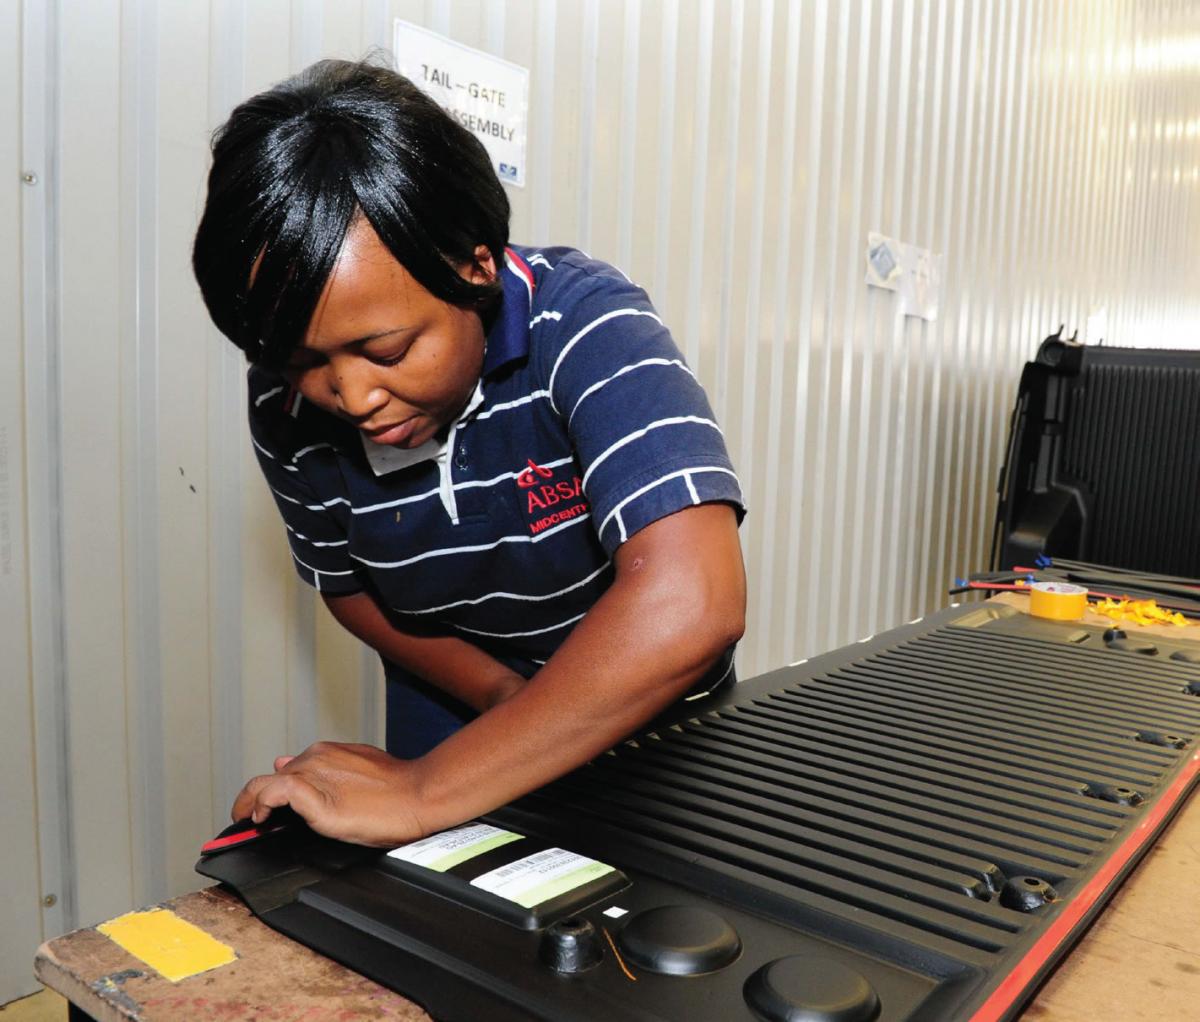 Young people from previously-disadvantaged backgrounds are benefiting from critical skills programmes set up by state-owned companies.